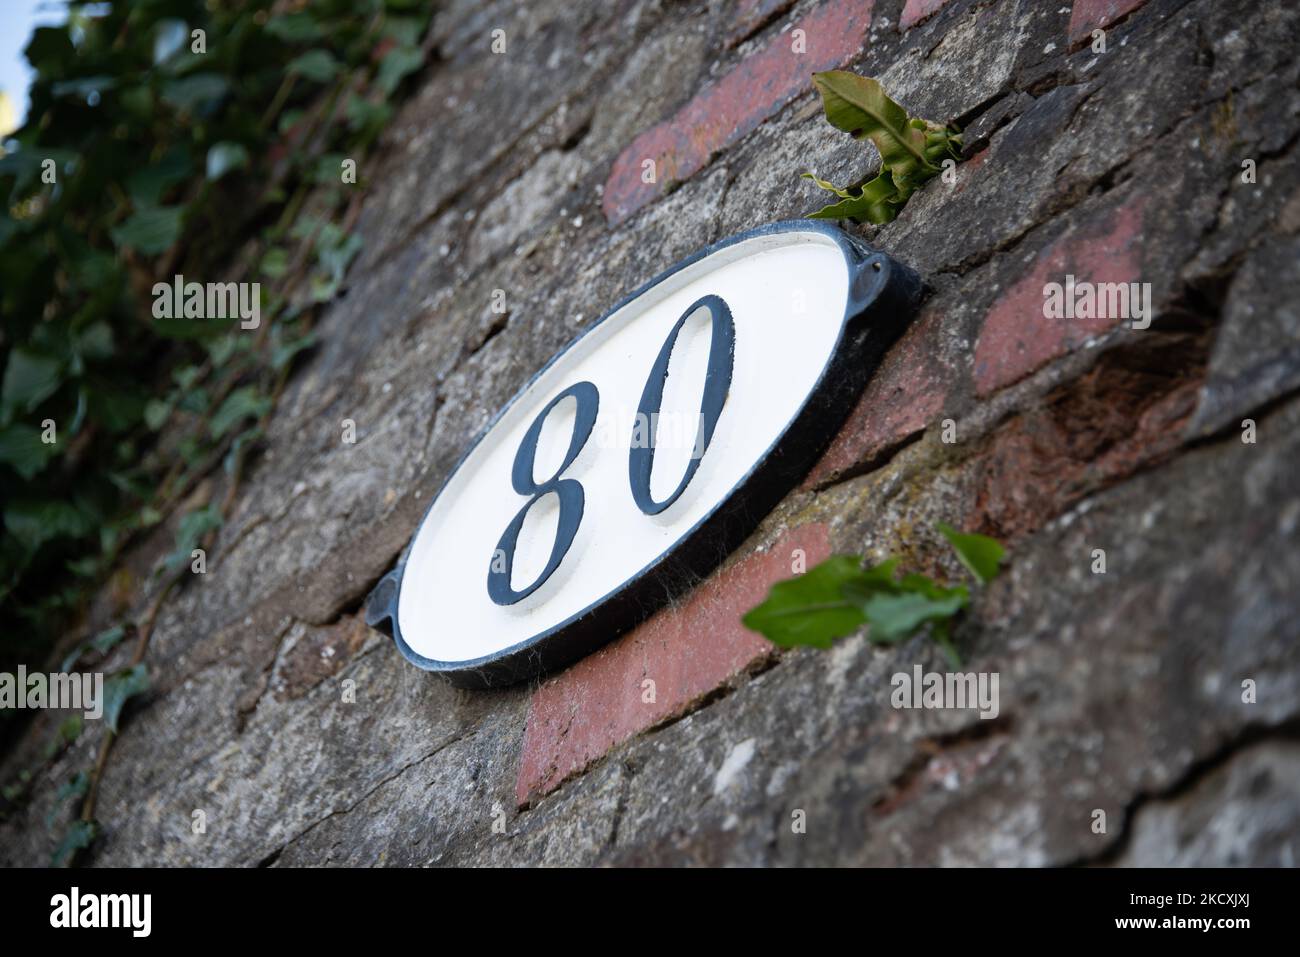 Identification plate on an old bridge over a canal showing the number 80 printed black on a white background Stock Photo